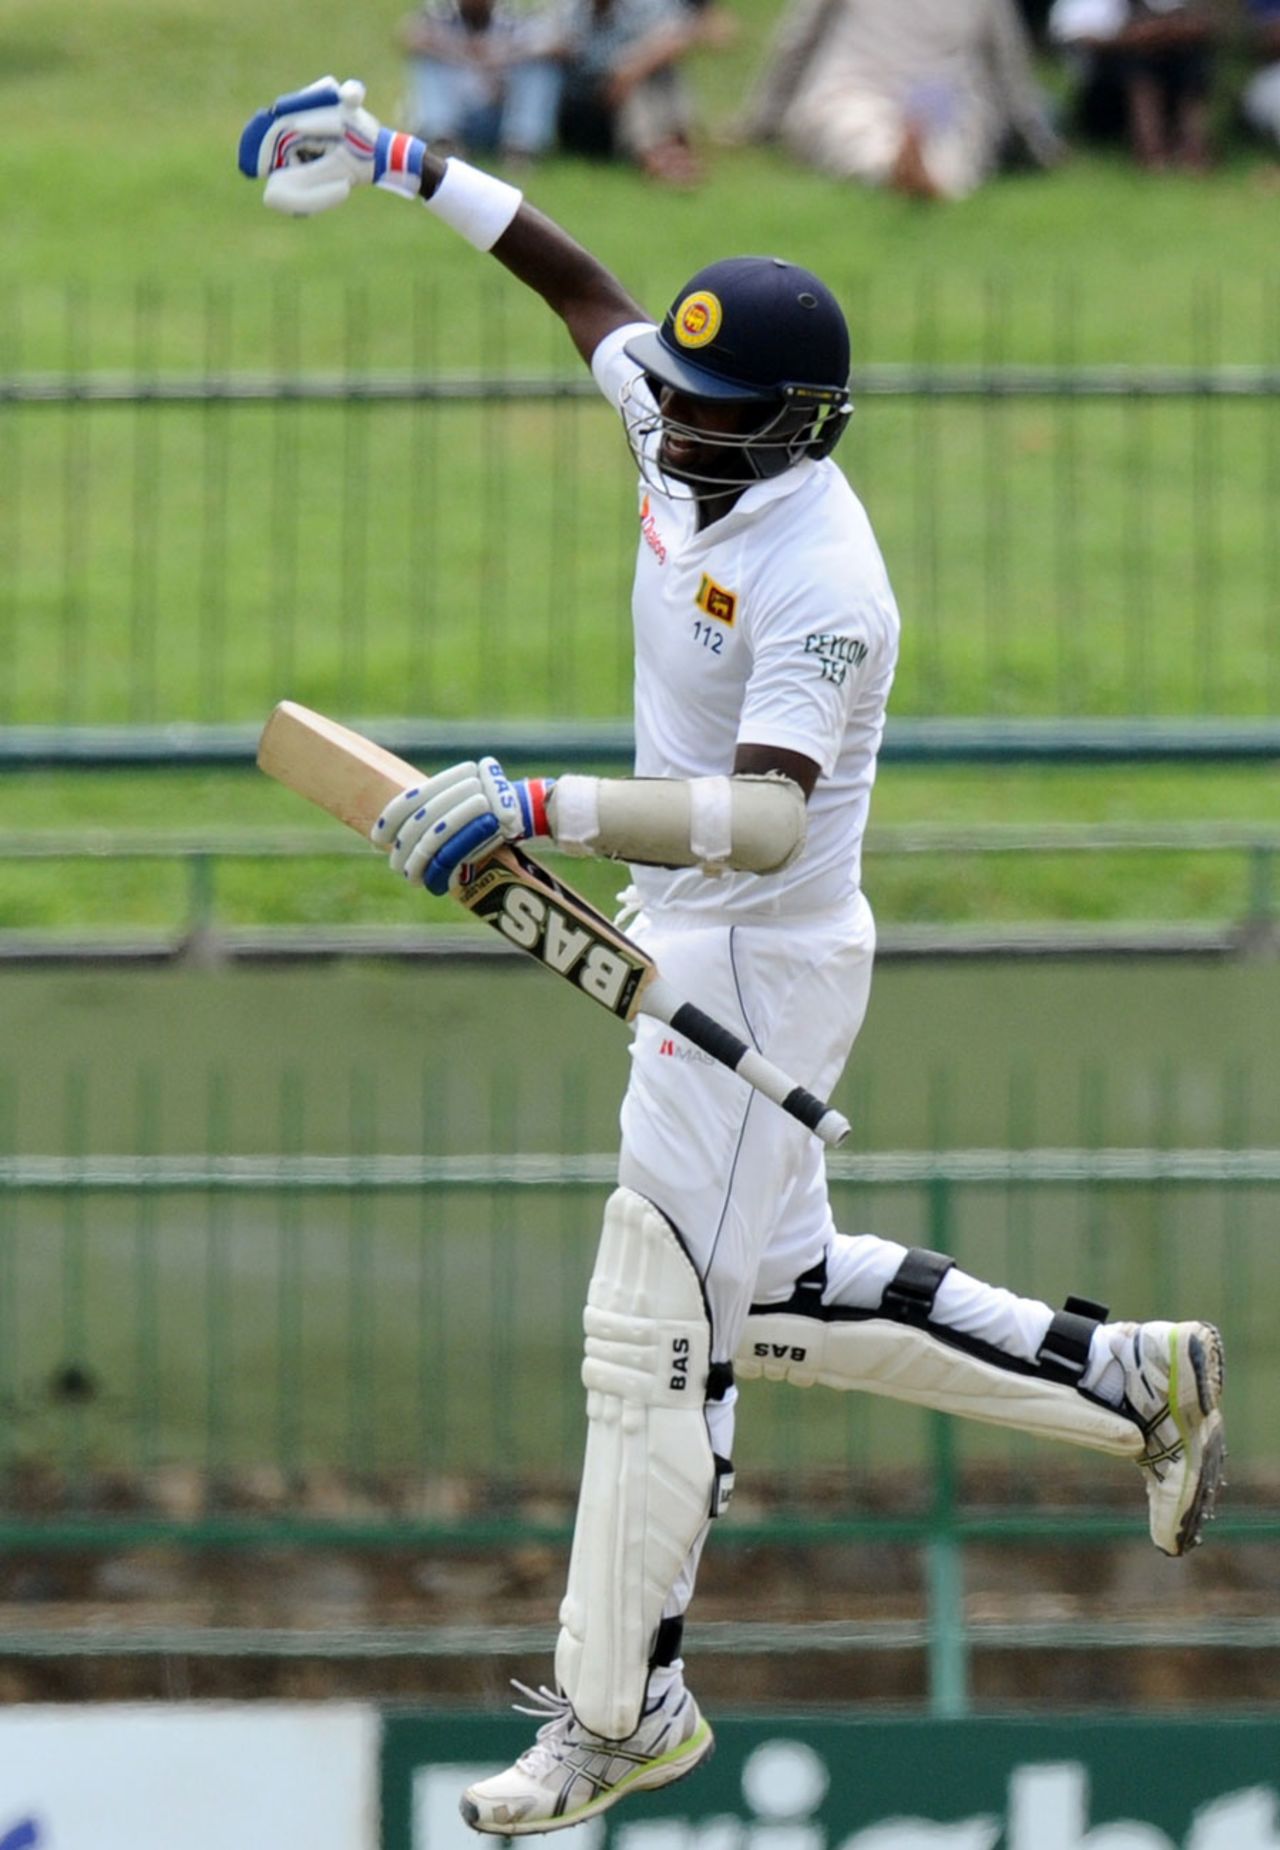 Angelo Mathews punches the air in joy after reaching his ton, Sri Lanka v Pakistan, 3rd Test, Pallekele, 4th day, July 6, 2015